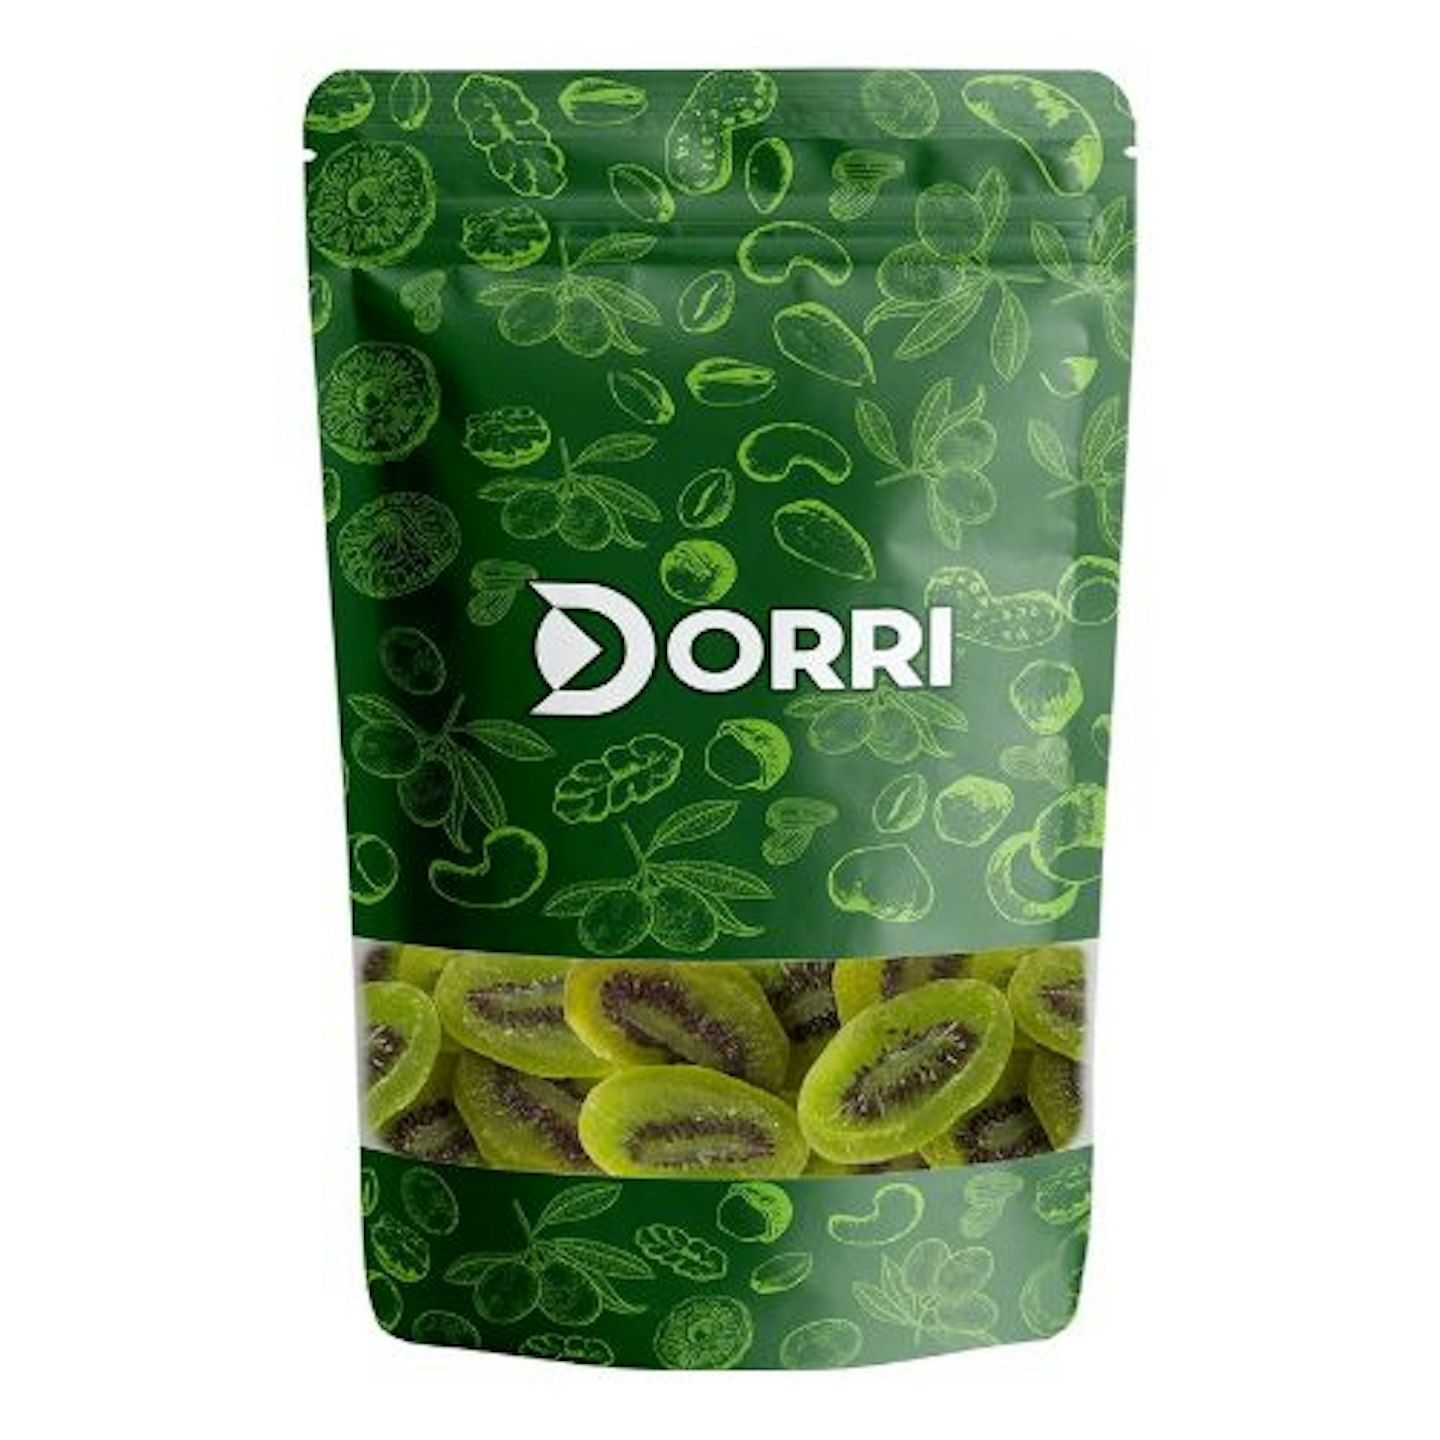 Dorri - Dried Kiwi (Available from 150g to 5kg) (150g)